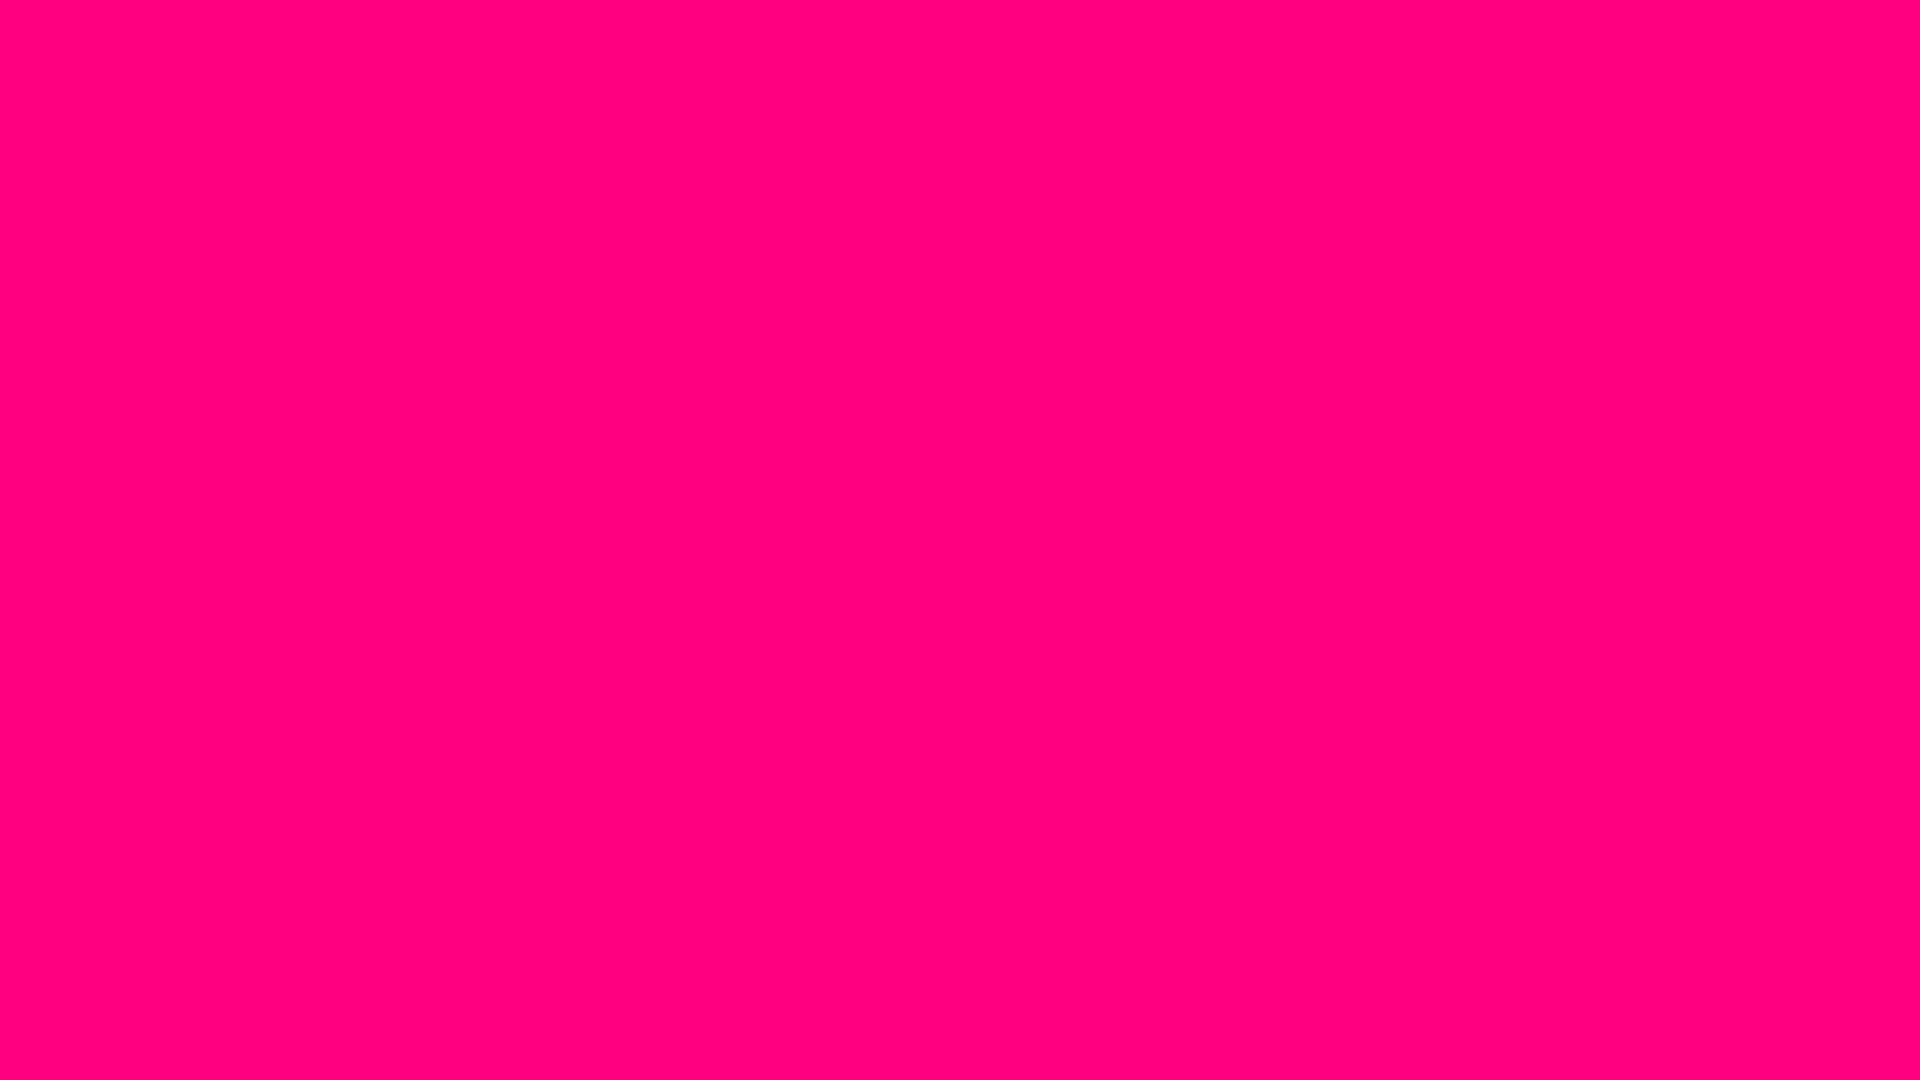 Rich, Vibrant And Intense Solid Pink Background Wallpaper